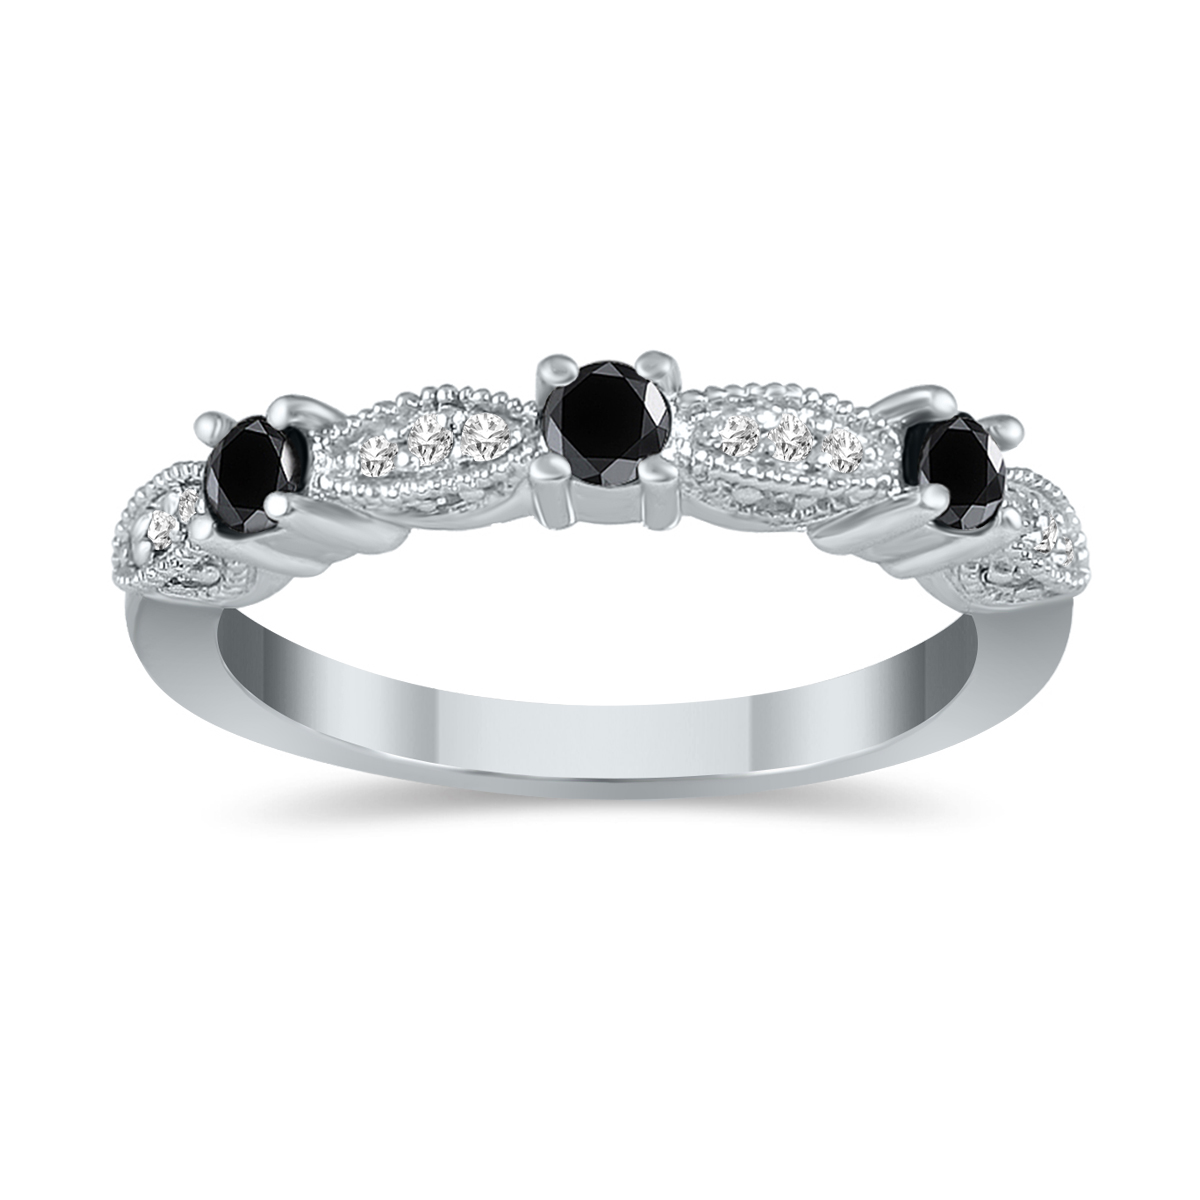 Image of 1/3 Carat TW Black and White Diamond Band in 10K White Gold